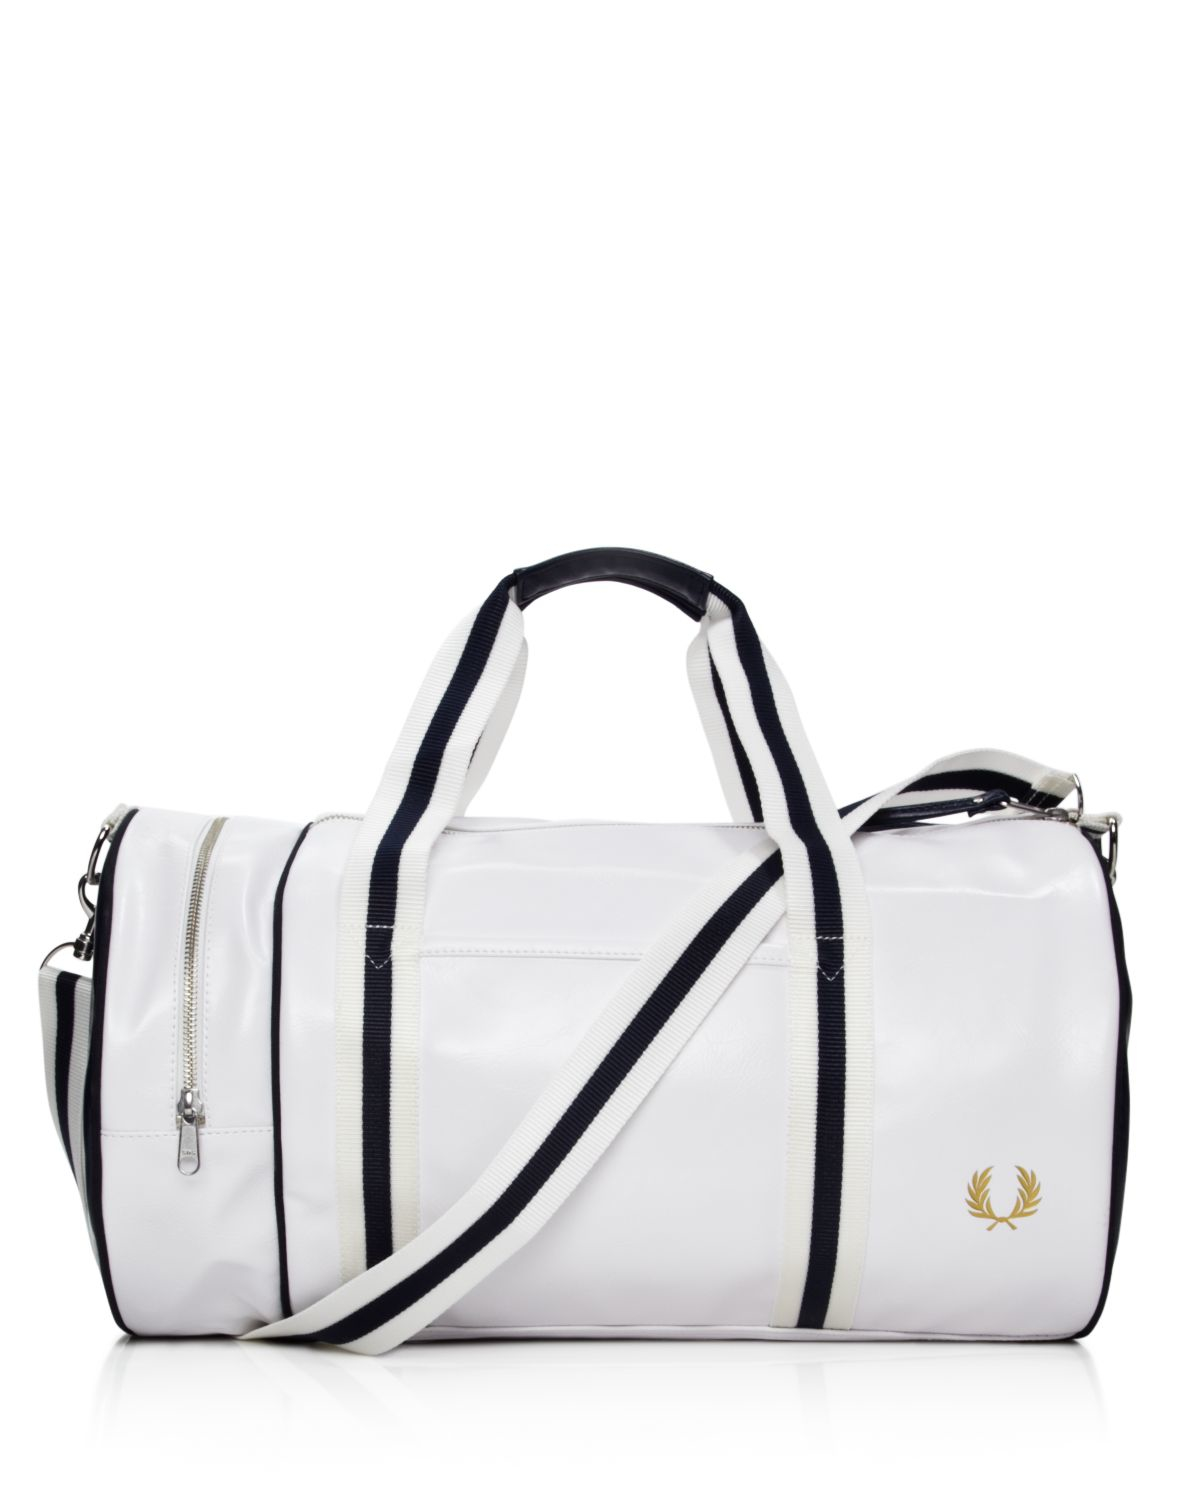 Fred Perry Classic Barrel Bag in White/Navy (White) for Men - Lyst